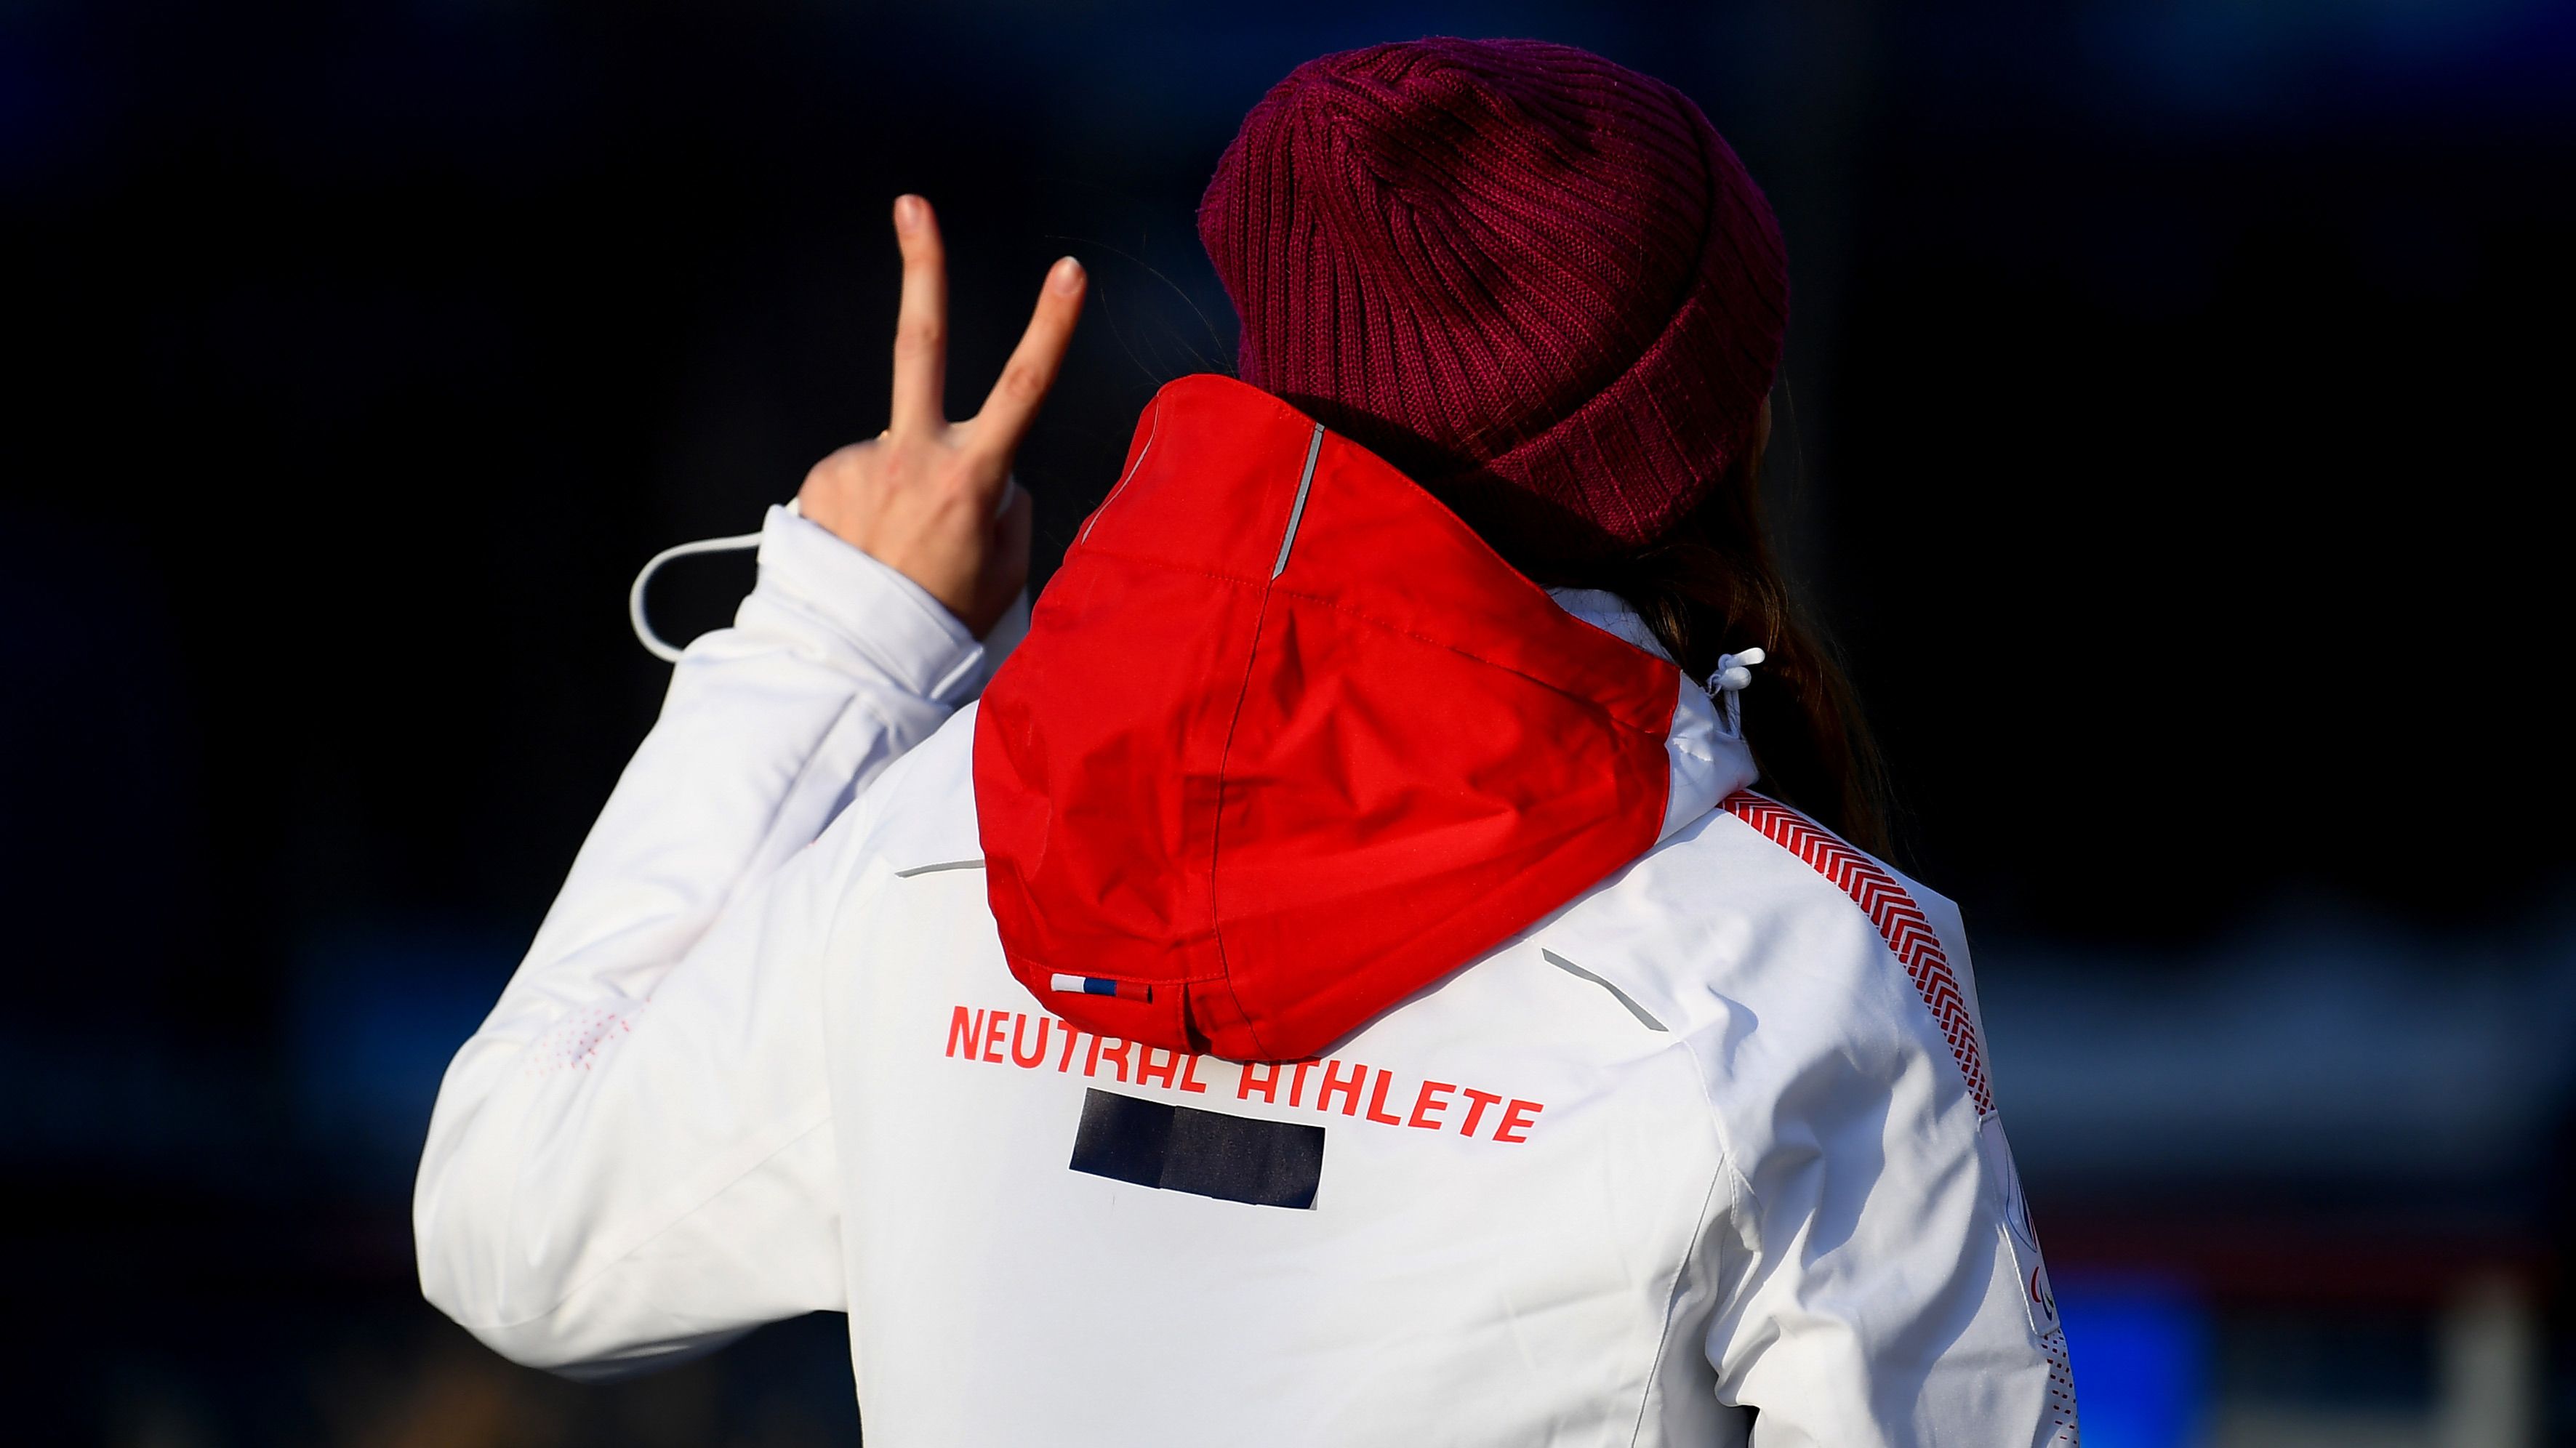 An athlete in a &#x27;Neutral Athlete&#x27; jacket at the 2022 Beijing Winter Olympics.